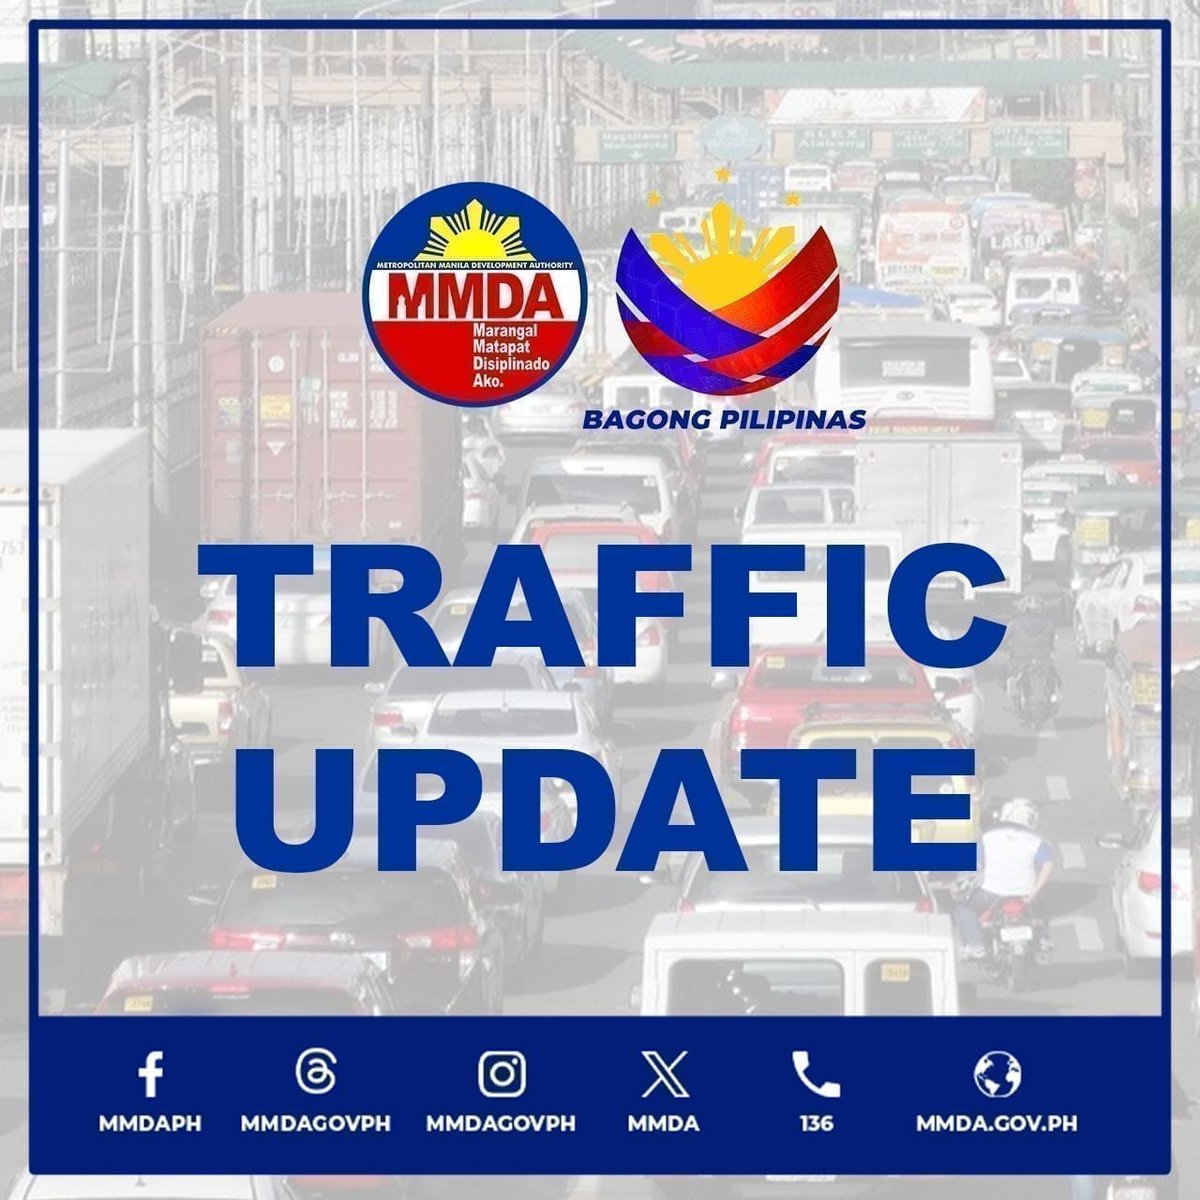 METROBASE Traffic Update as of 7:00PM WHEN: April 25, 2024 A. MAJOR ROADS: *EDSA SOUTHBOUND - Muñoz, moderate to slow moving (due to volume of vehicles) - Reliance to Guadalupe, moderate to slow moving (due to volume of vehicles) - Orense to Magallanes split, moderate to slow…